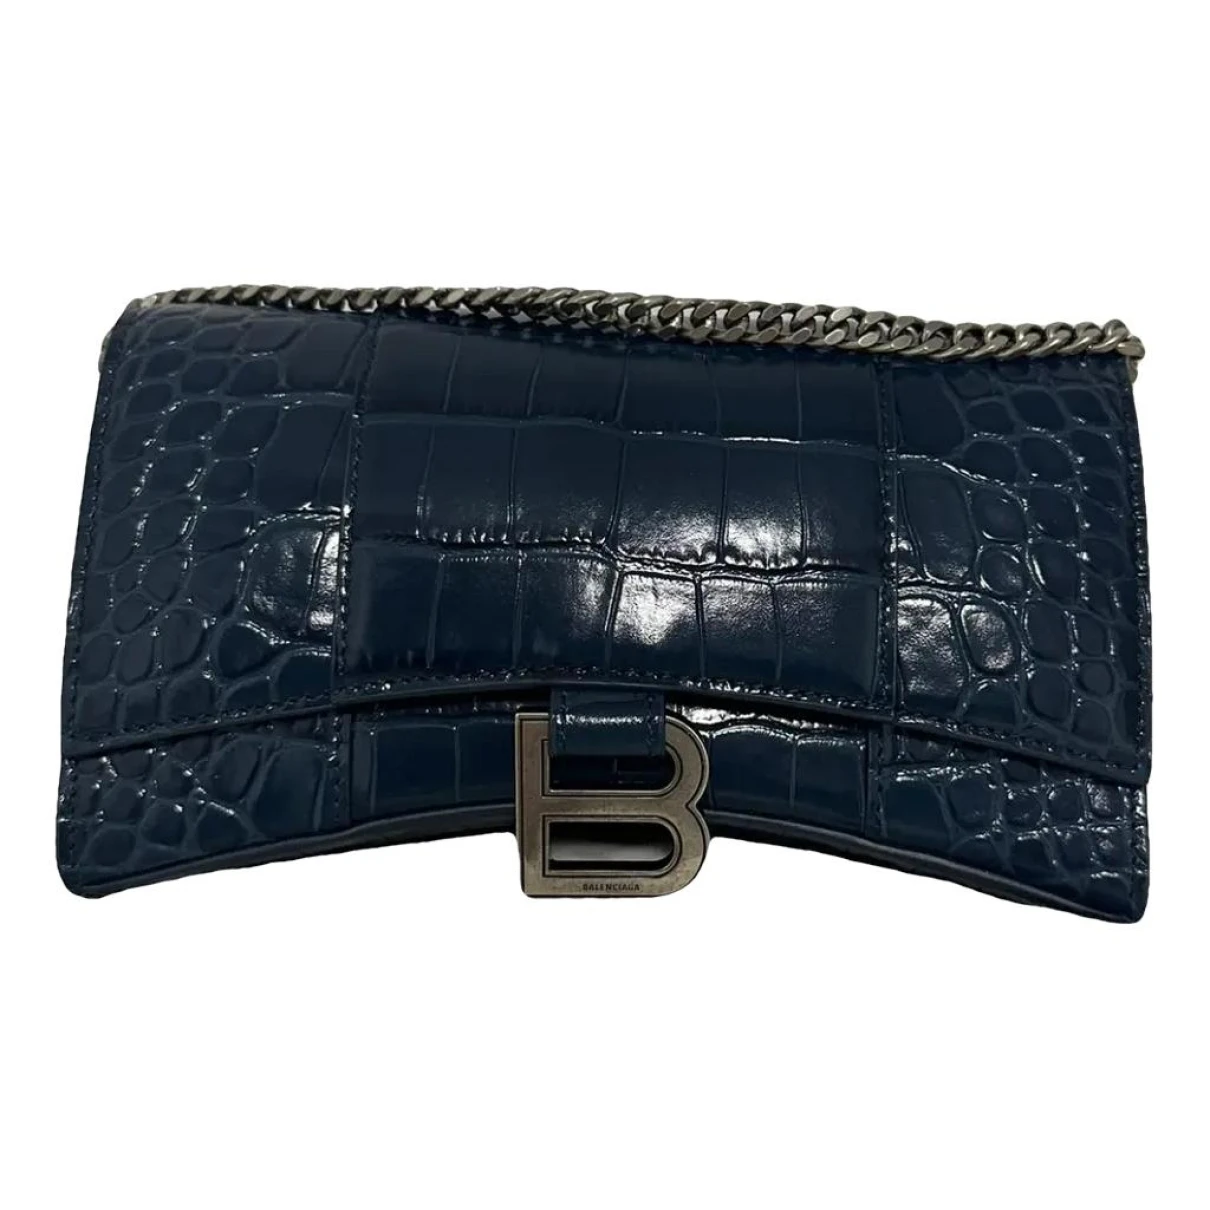 Pre-owned Balenciaga Hourglass Leather Crossbody Bag In Navy